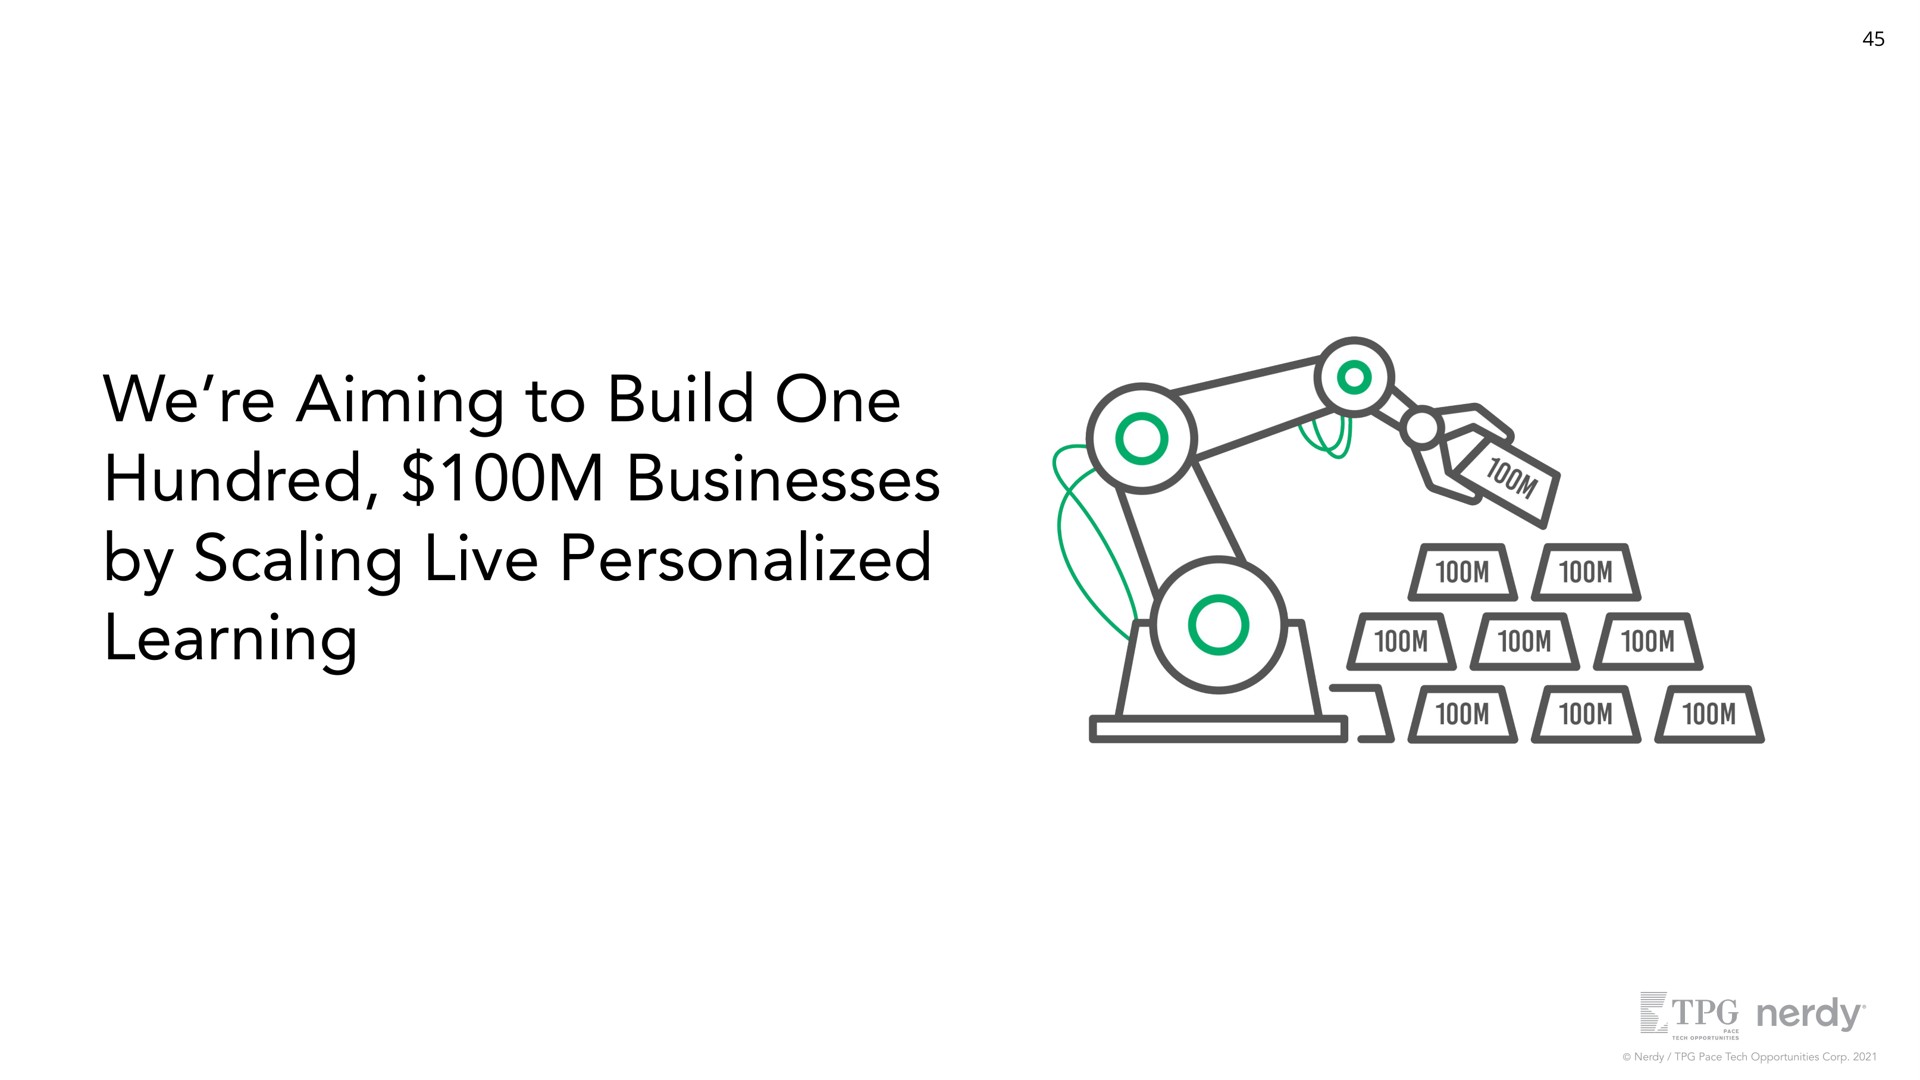 we aiming to build one hundred businesses by scaling live personalized learning | Nerdy